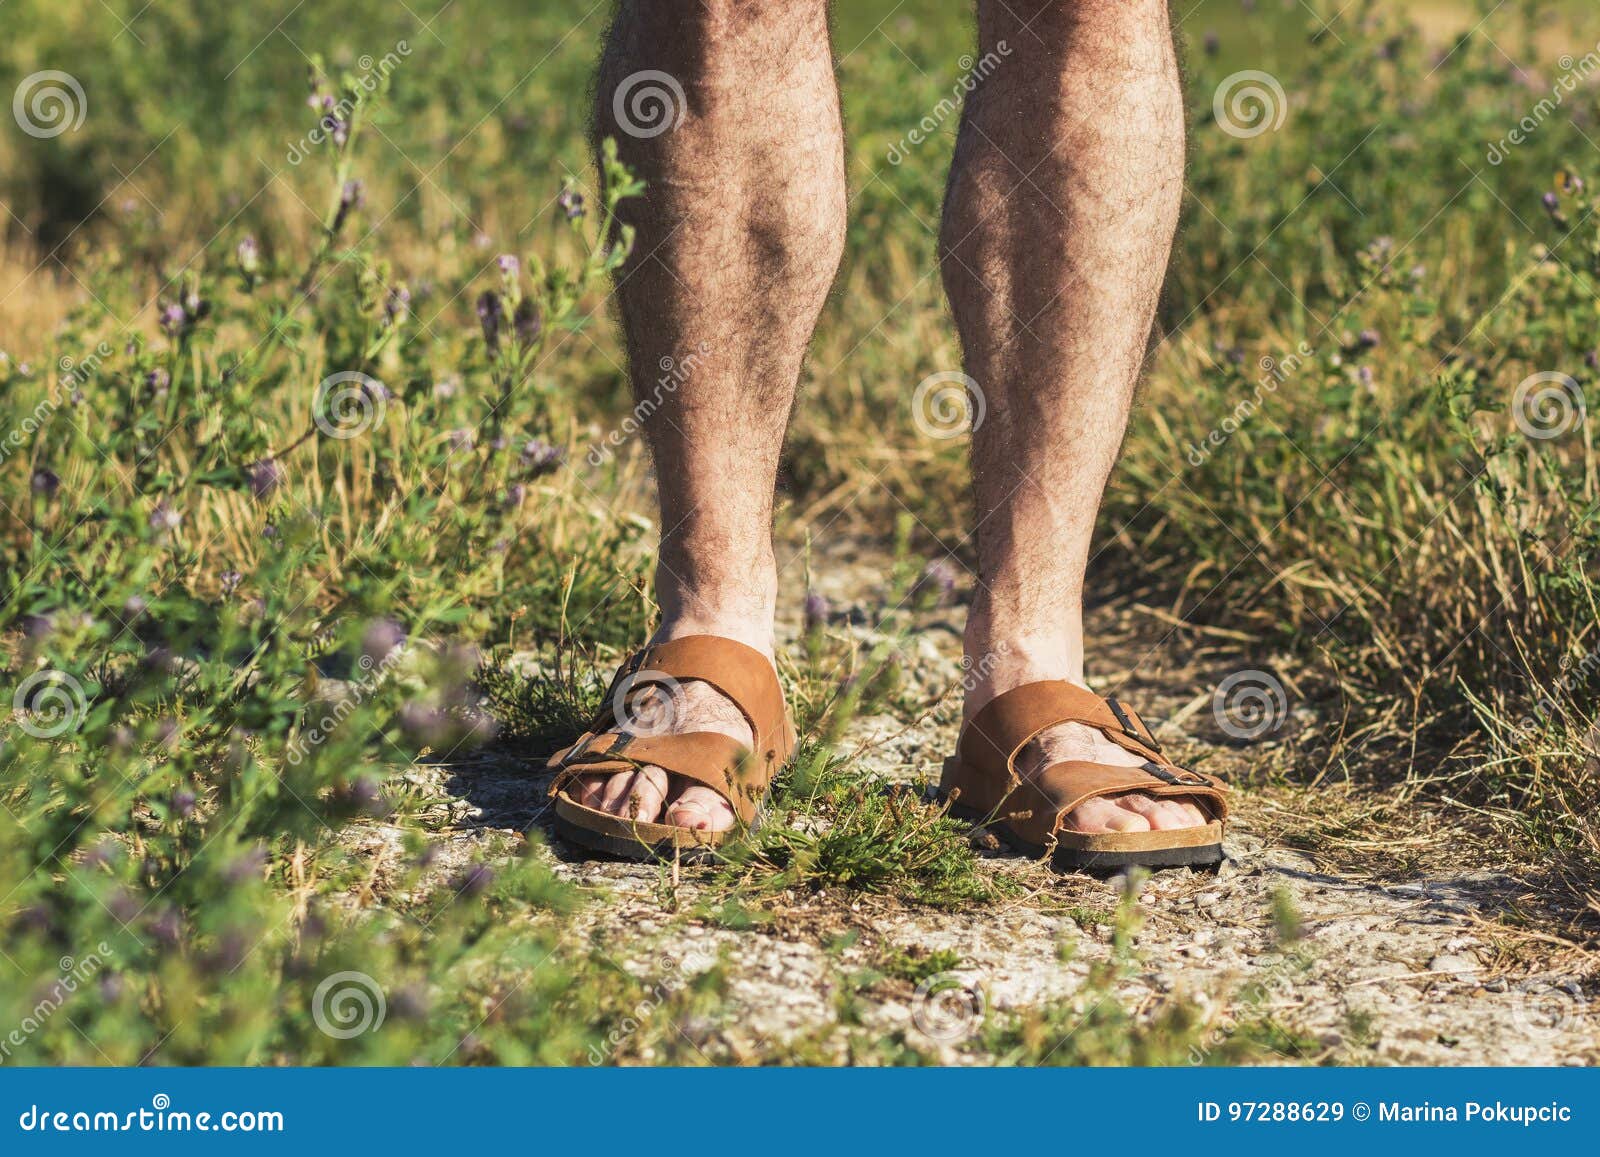 male legs in brown leather sandals